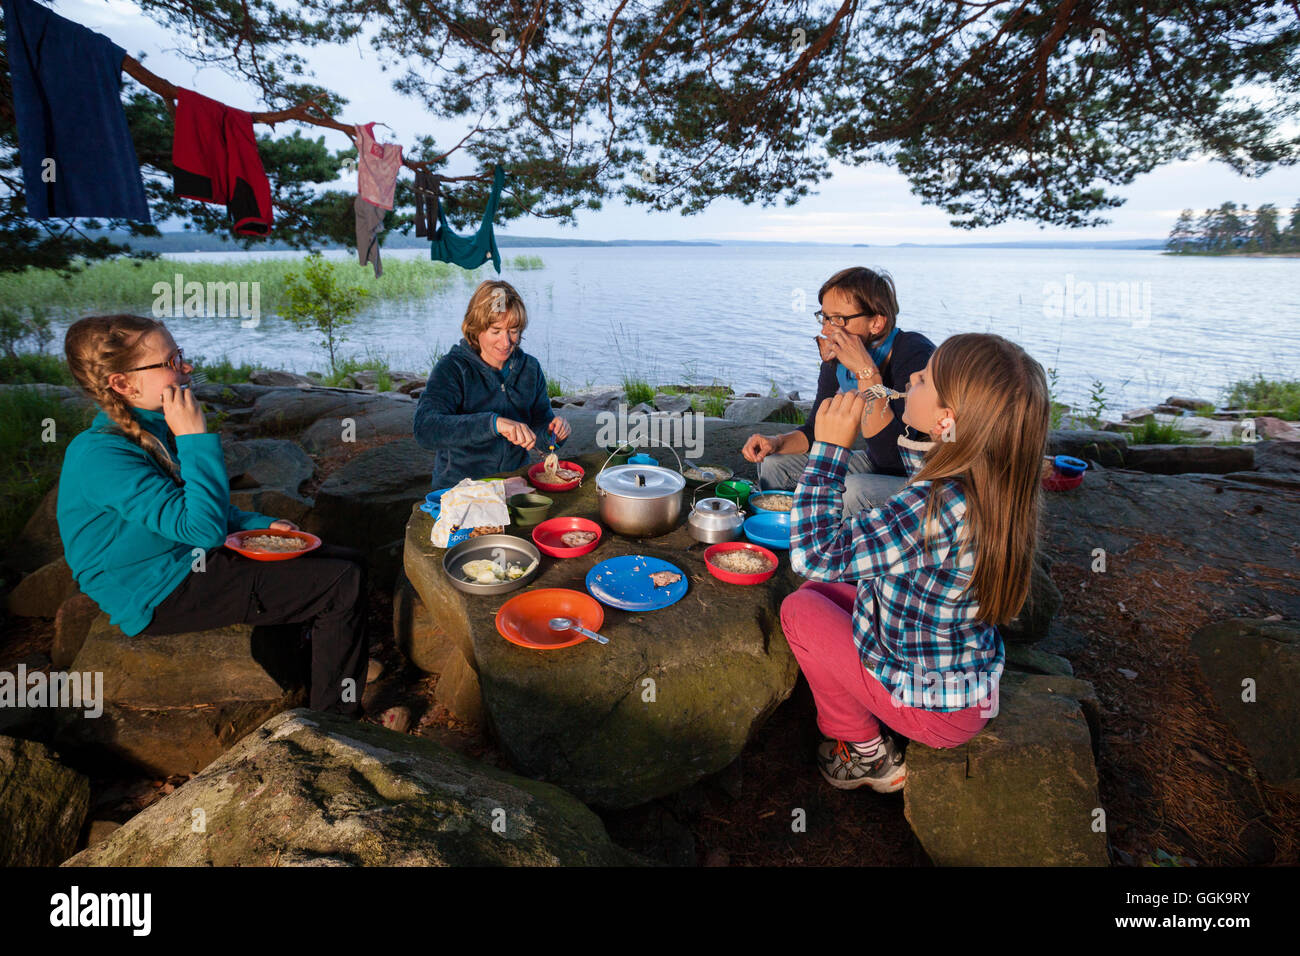 Two girls and two women having dinner at the lake Glafsfjorden, Vaermland, Schweden Stock Photo